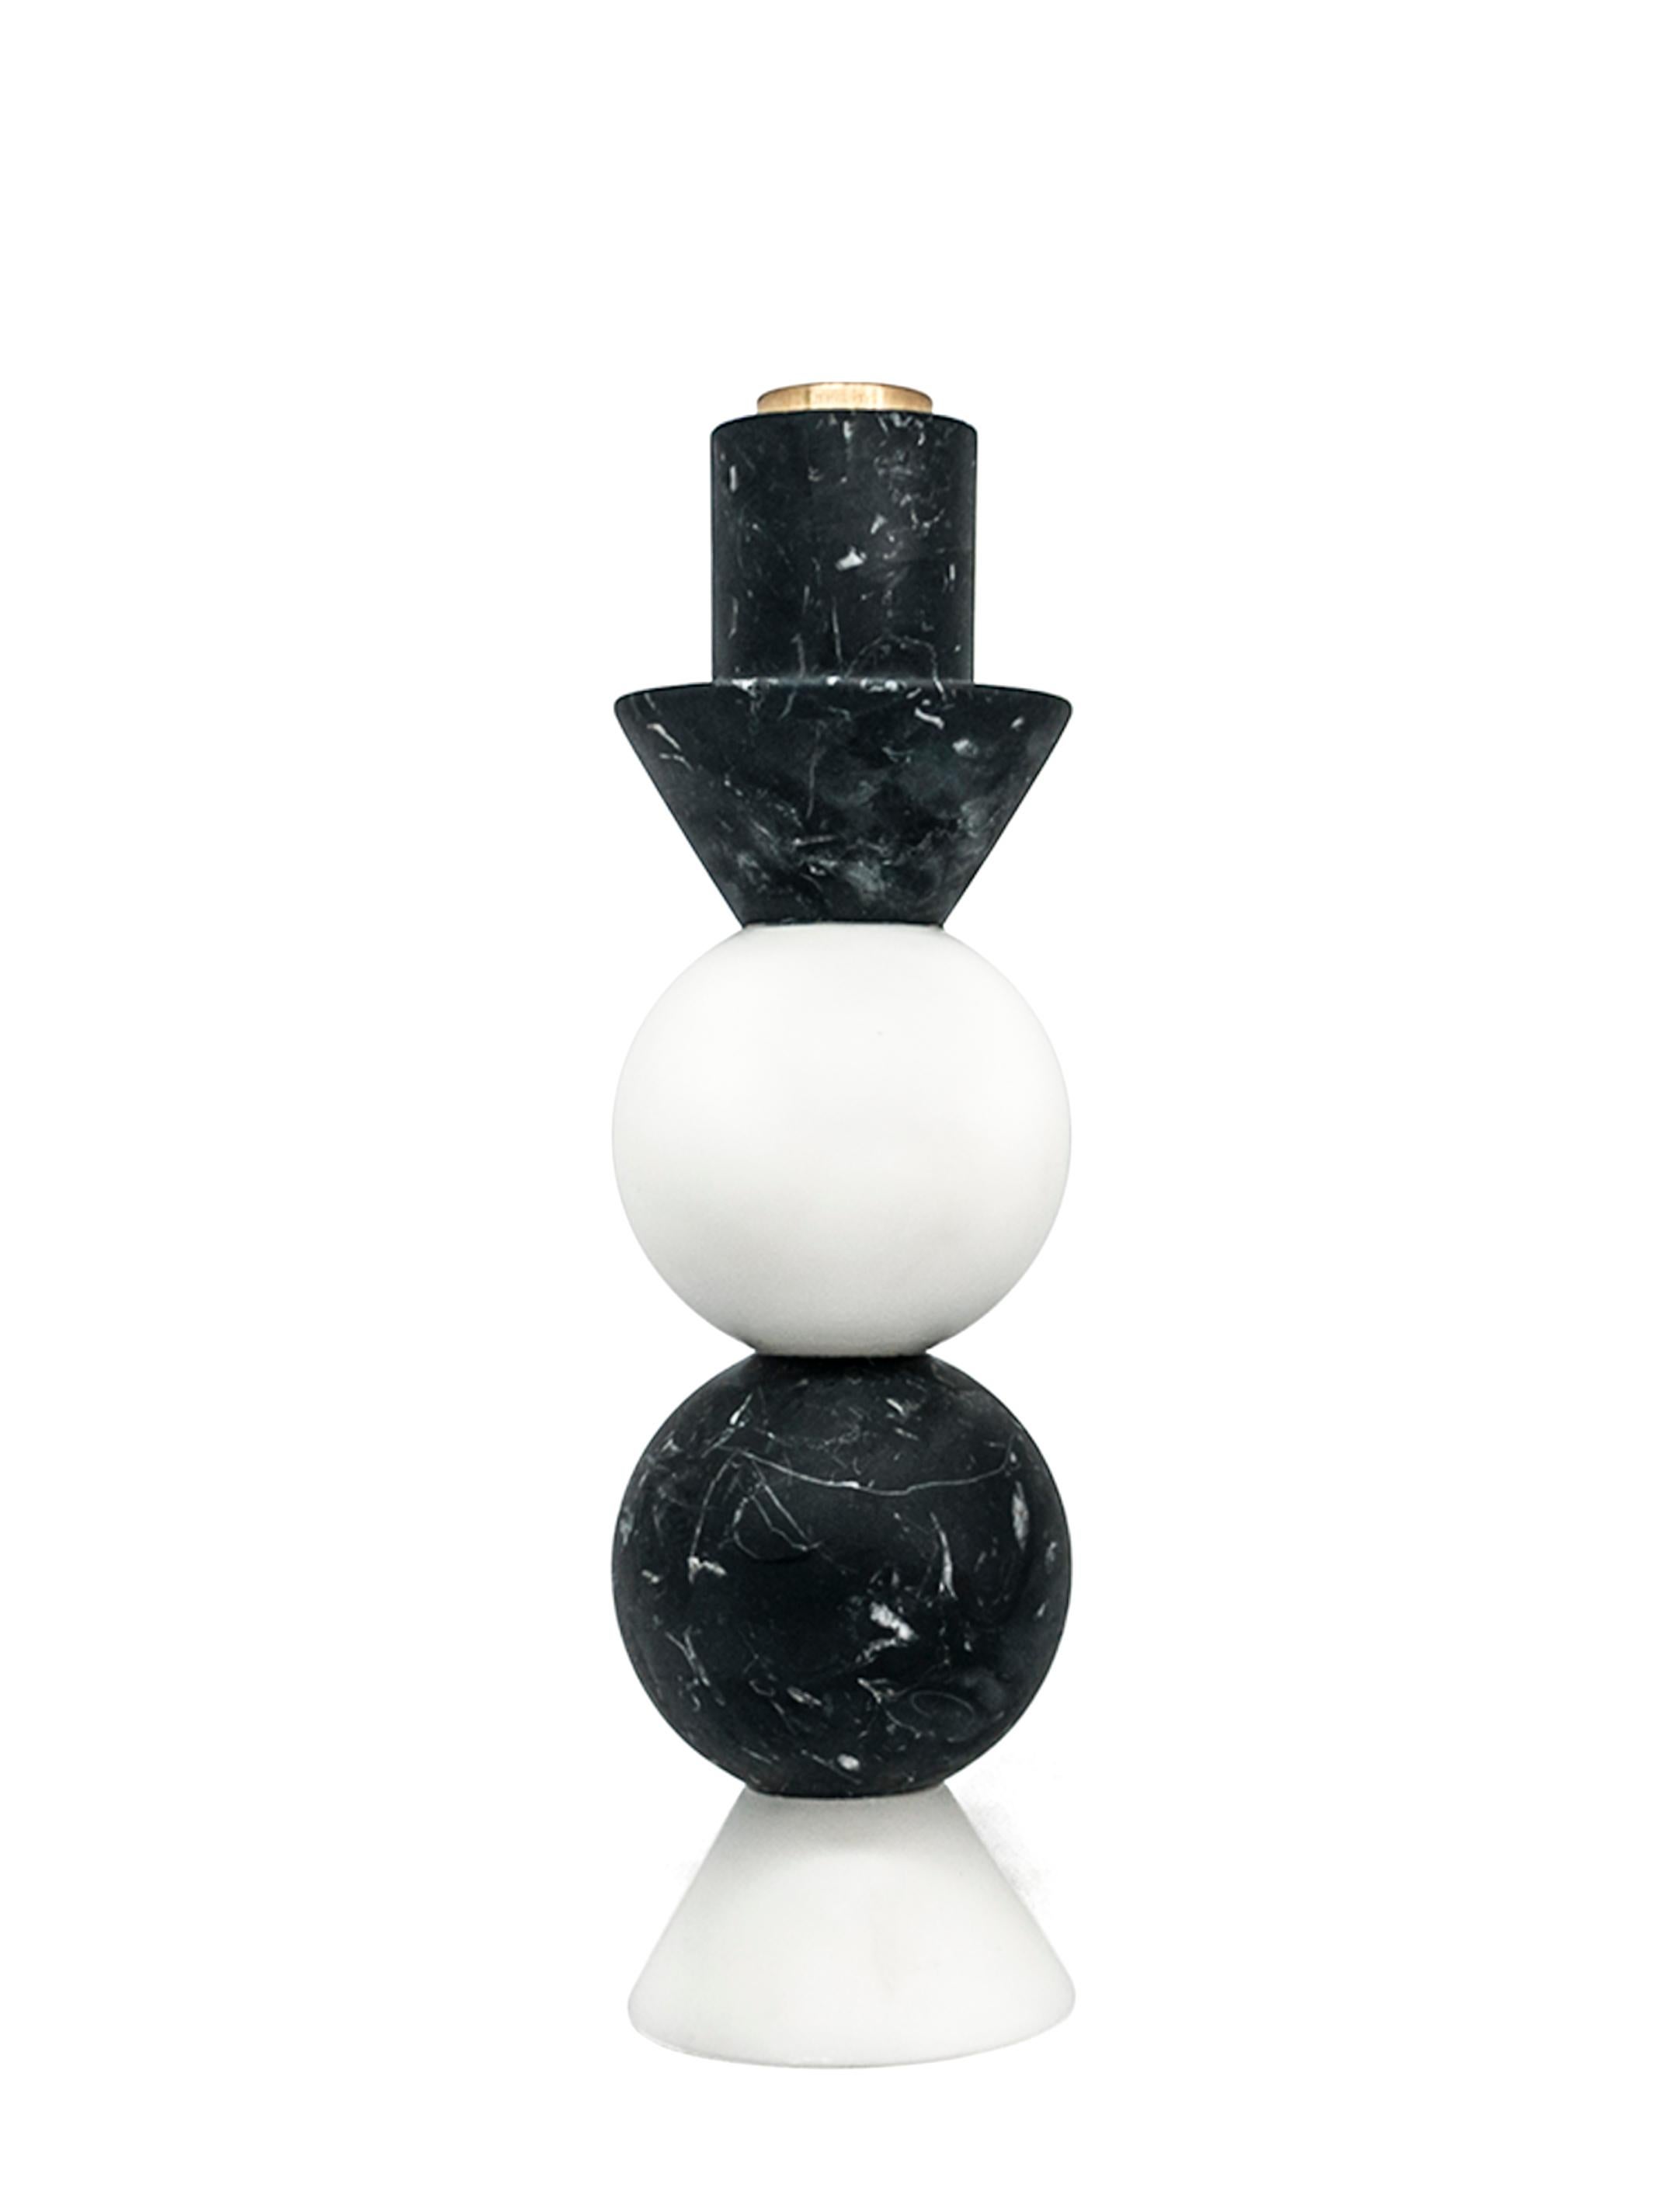 High rounded two-tone candleholder in white Carrara marble, black Marquina marble and brass.
-Jacopo Simonetti design for FiammettaV-
Each piece is in a way unique (every marble block is different in veins and shades) and handmade by Italian